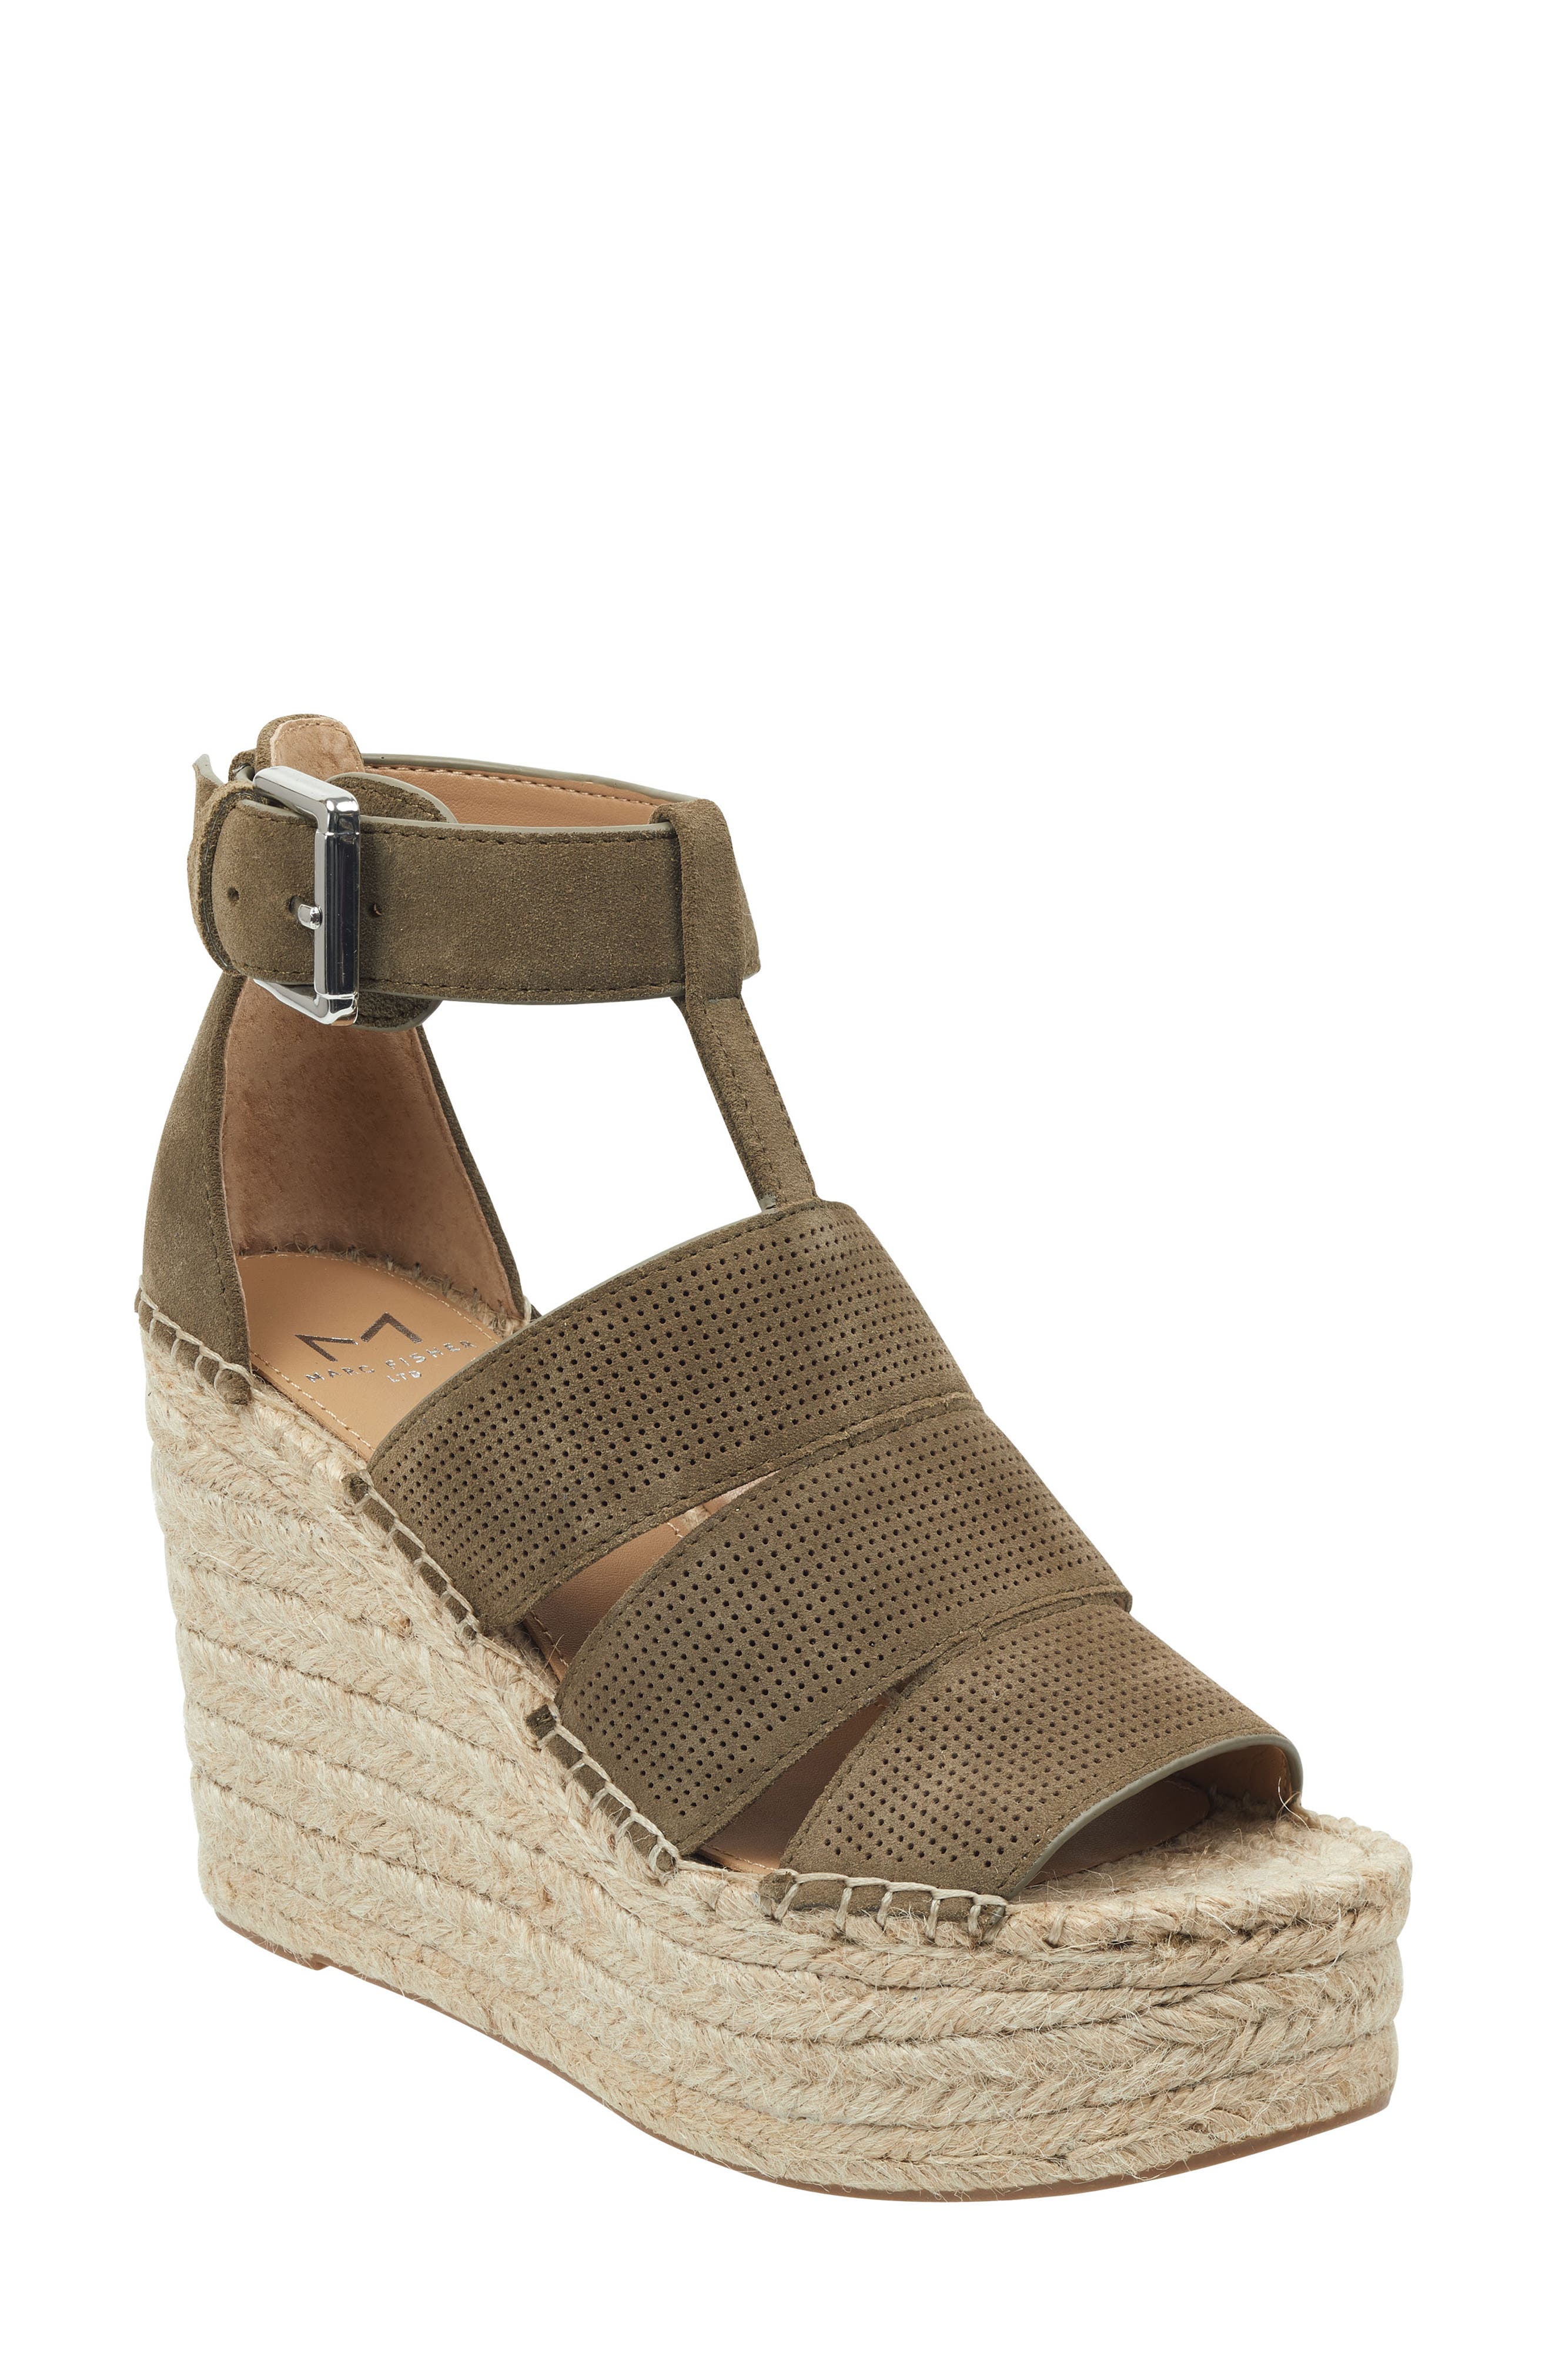 marc fisher espadrille wedge